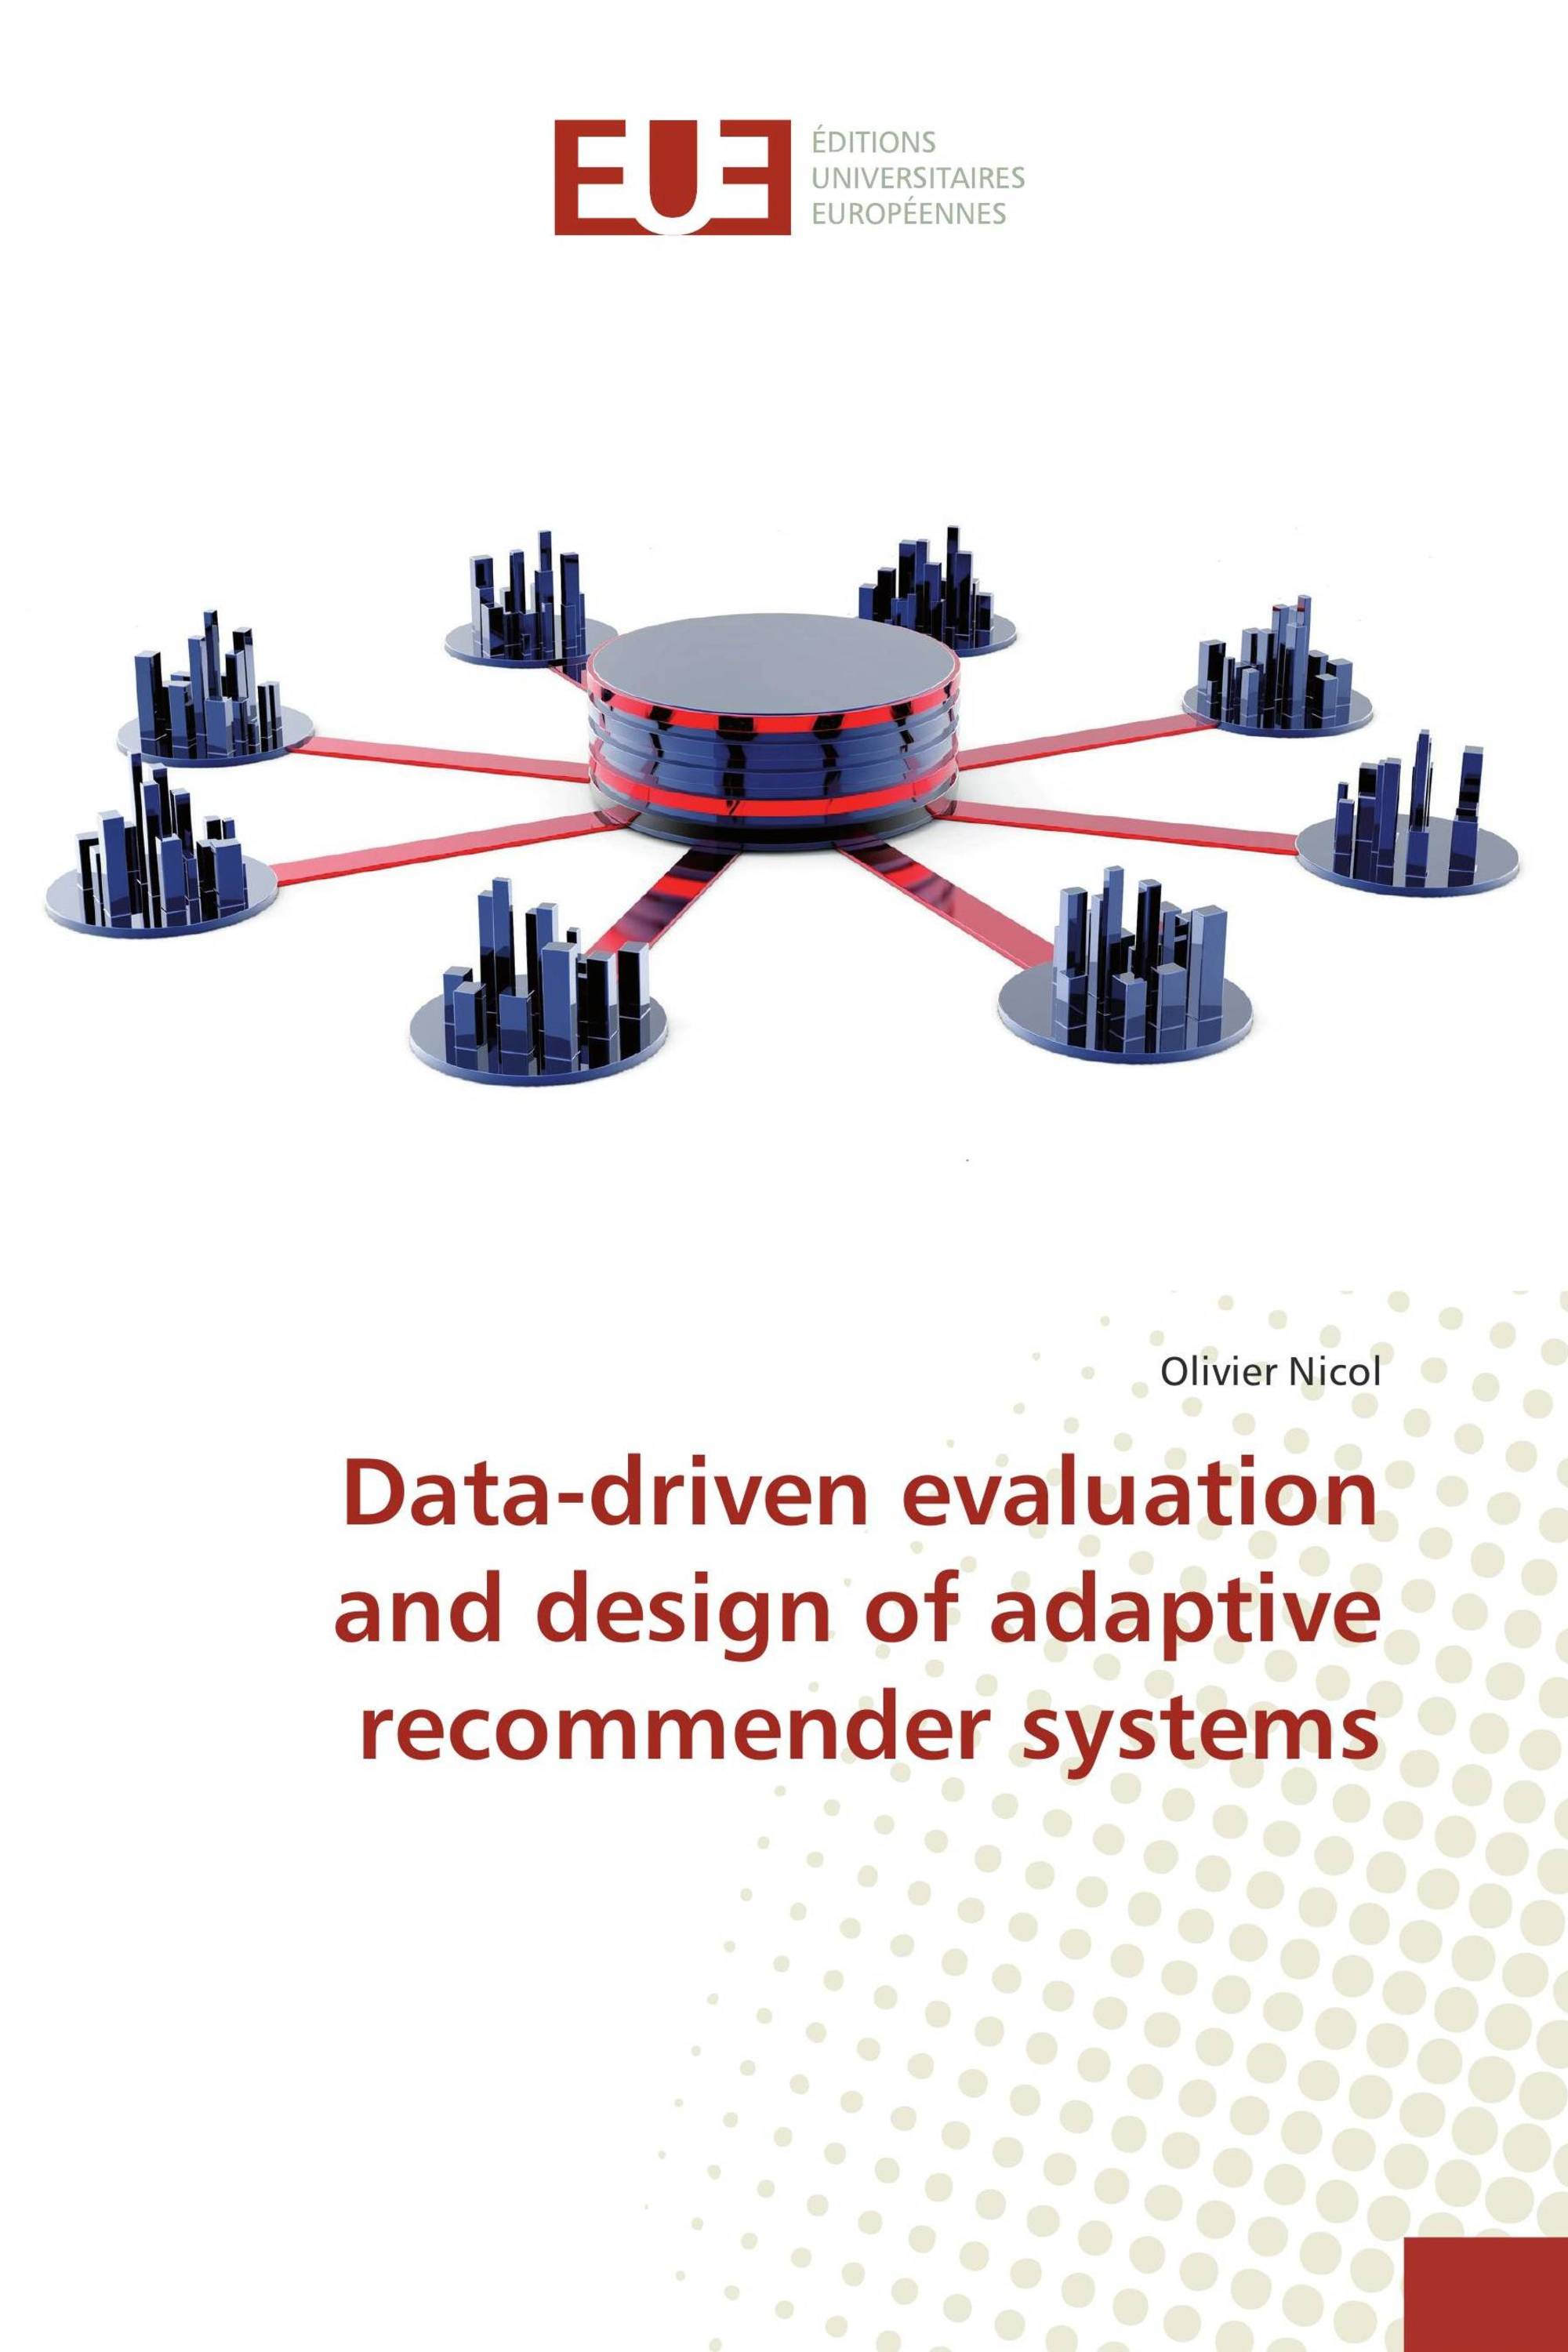 Data-driven evaluation and design of adaptive recommender systems